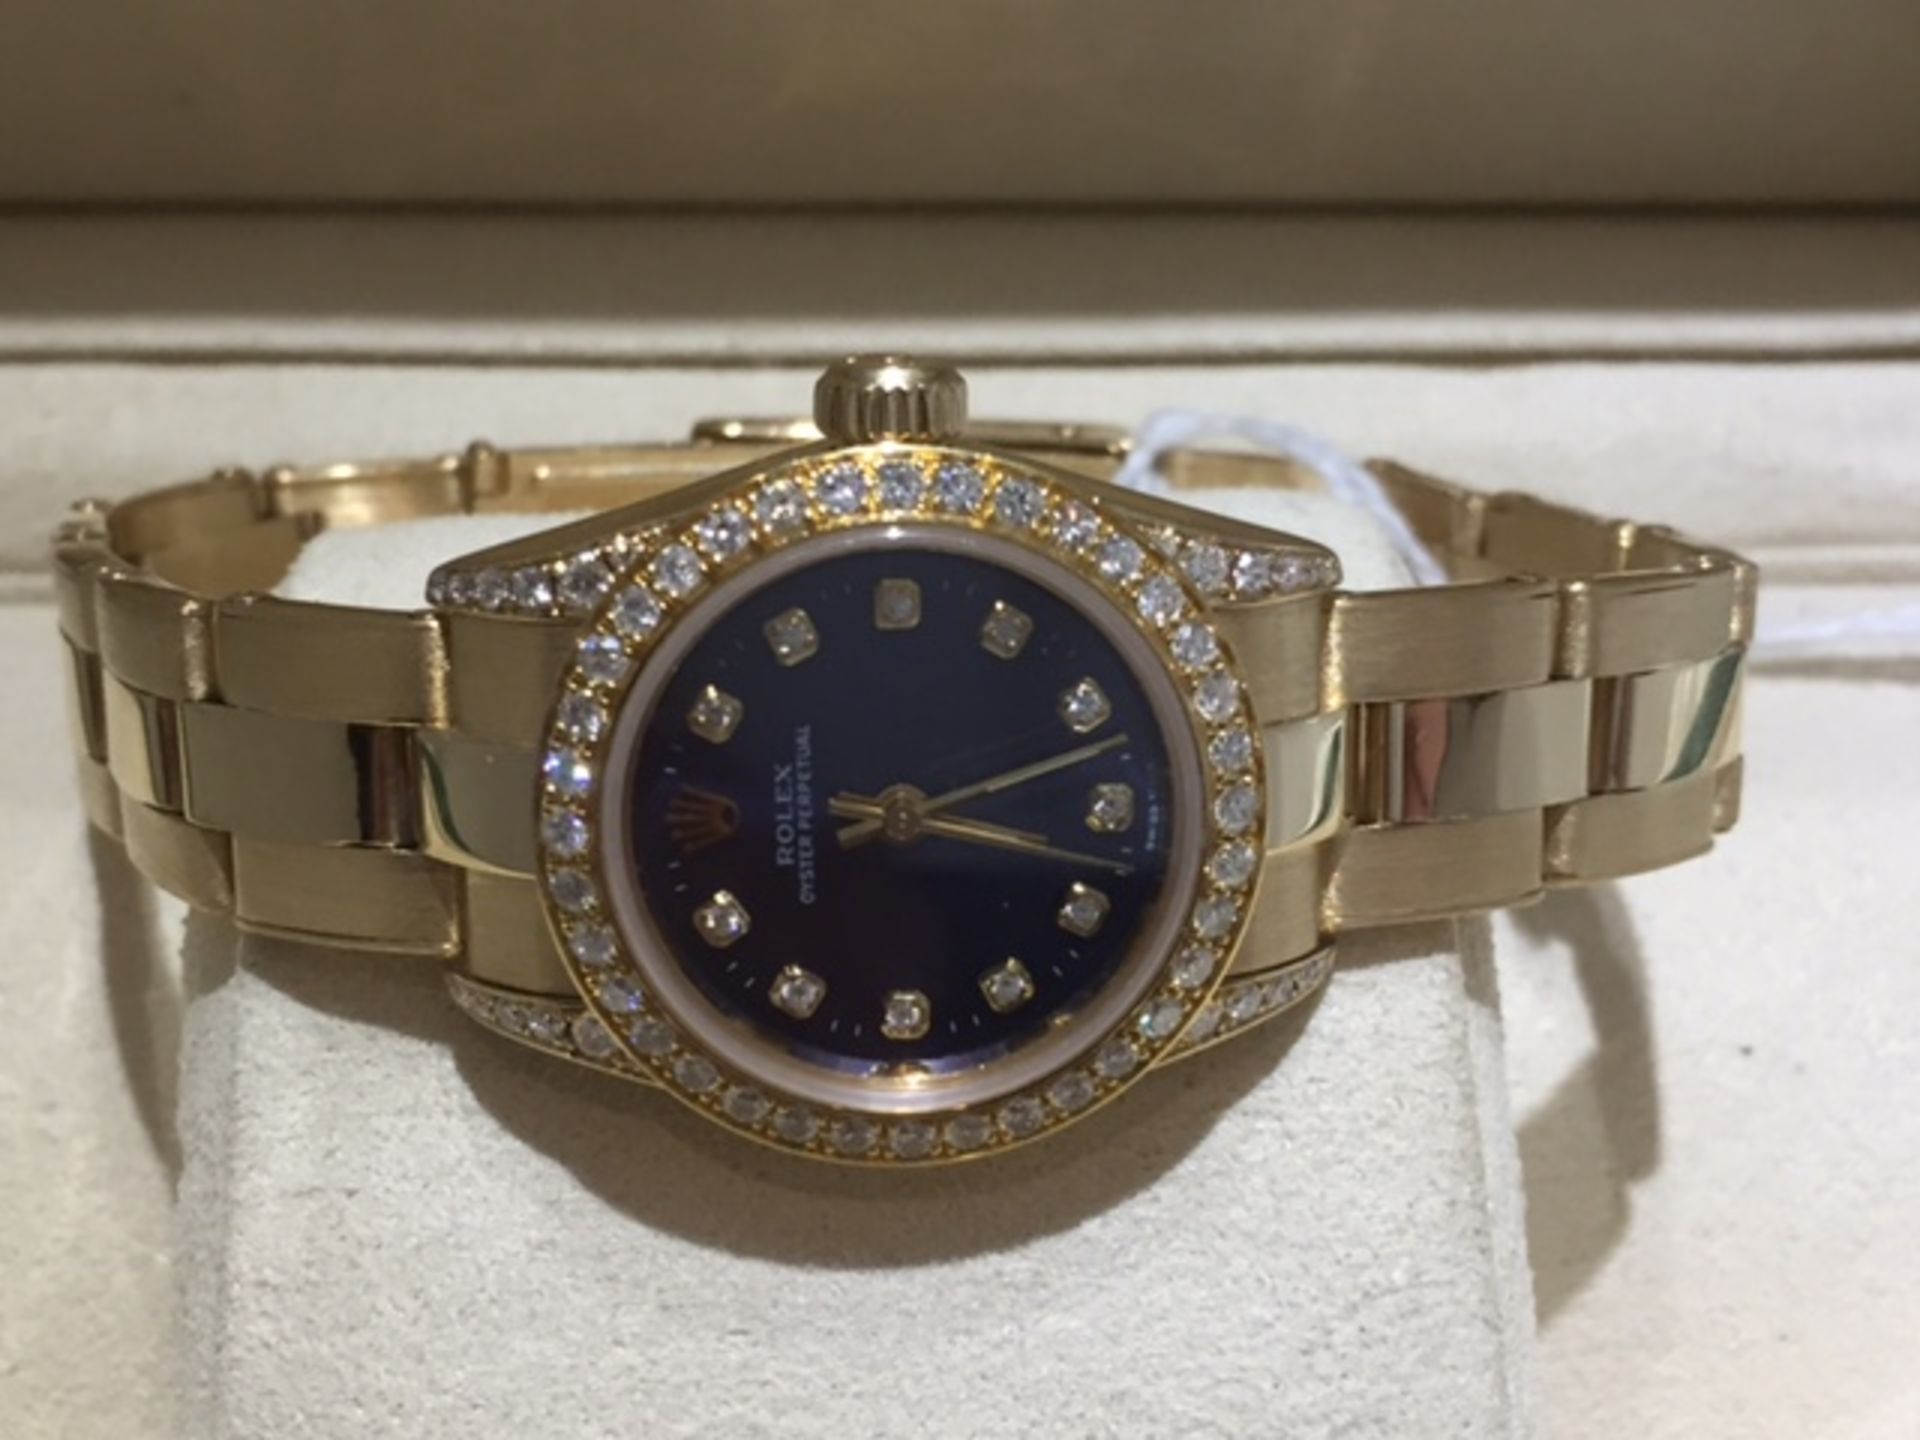 LADIES ROLEX 18ct SOLID GOLD OYSTER PERPETUAL AFTER SET WITH DIAMOND DIAL, DIAMOND BEZEL, DIAMOND - Image 4 of 6